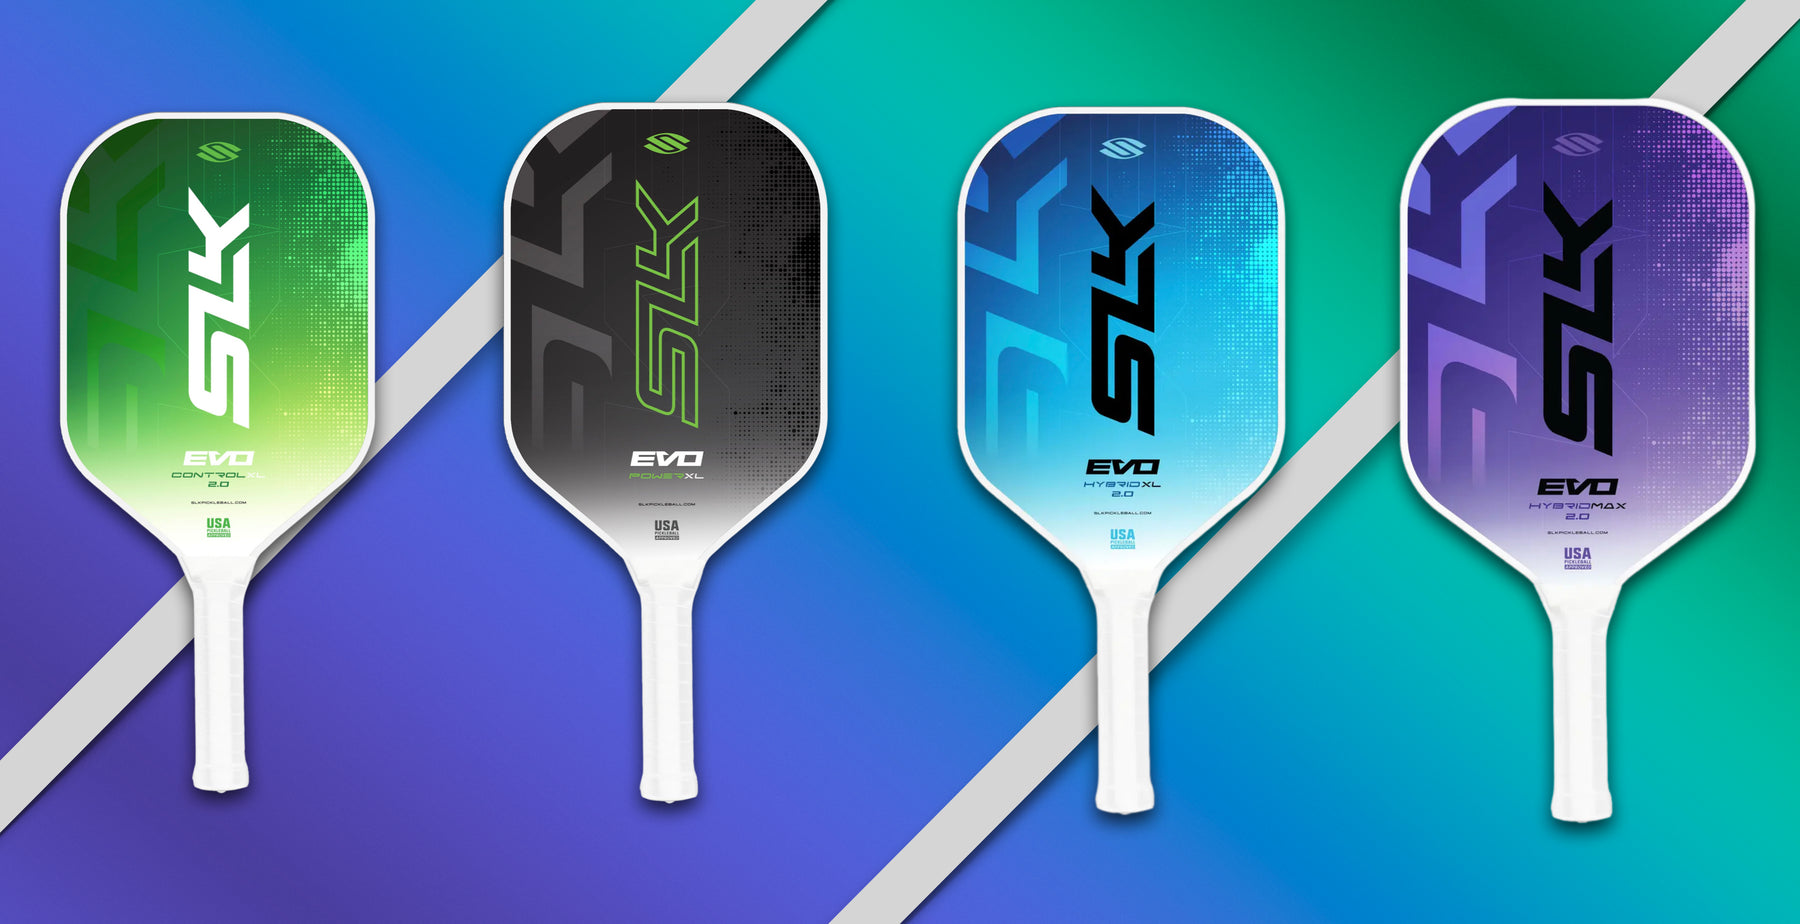 The Selkirk SLK EVO 2.0 pickleball paddles feature power, control, comfort and spin